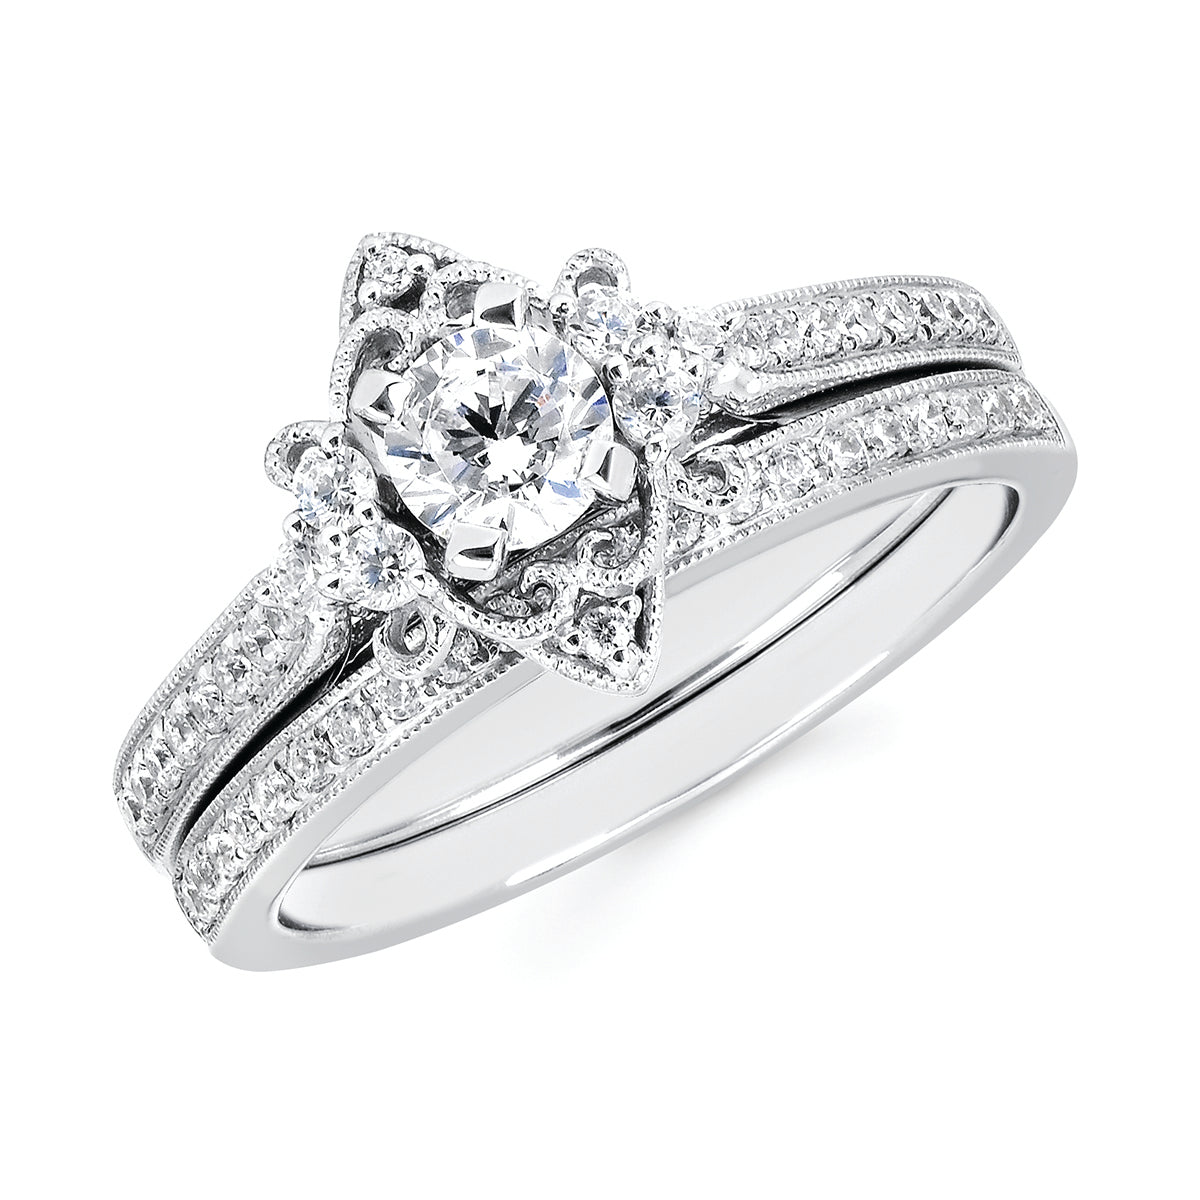 Vintage Bridal: 1/5 Ctw. Diamond Semi Mount available for 1/3 Ct. Round Center Diamond in 14K Gold